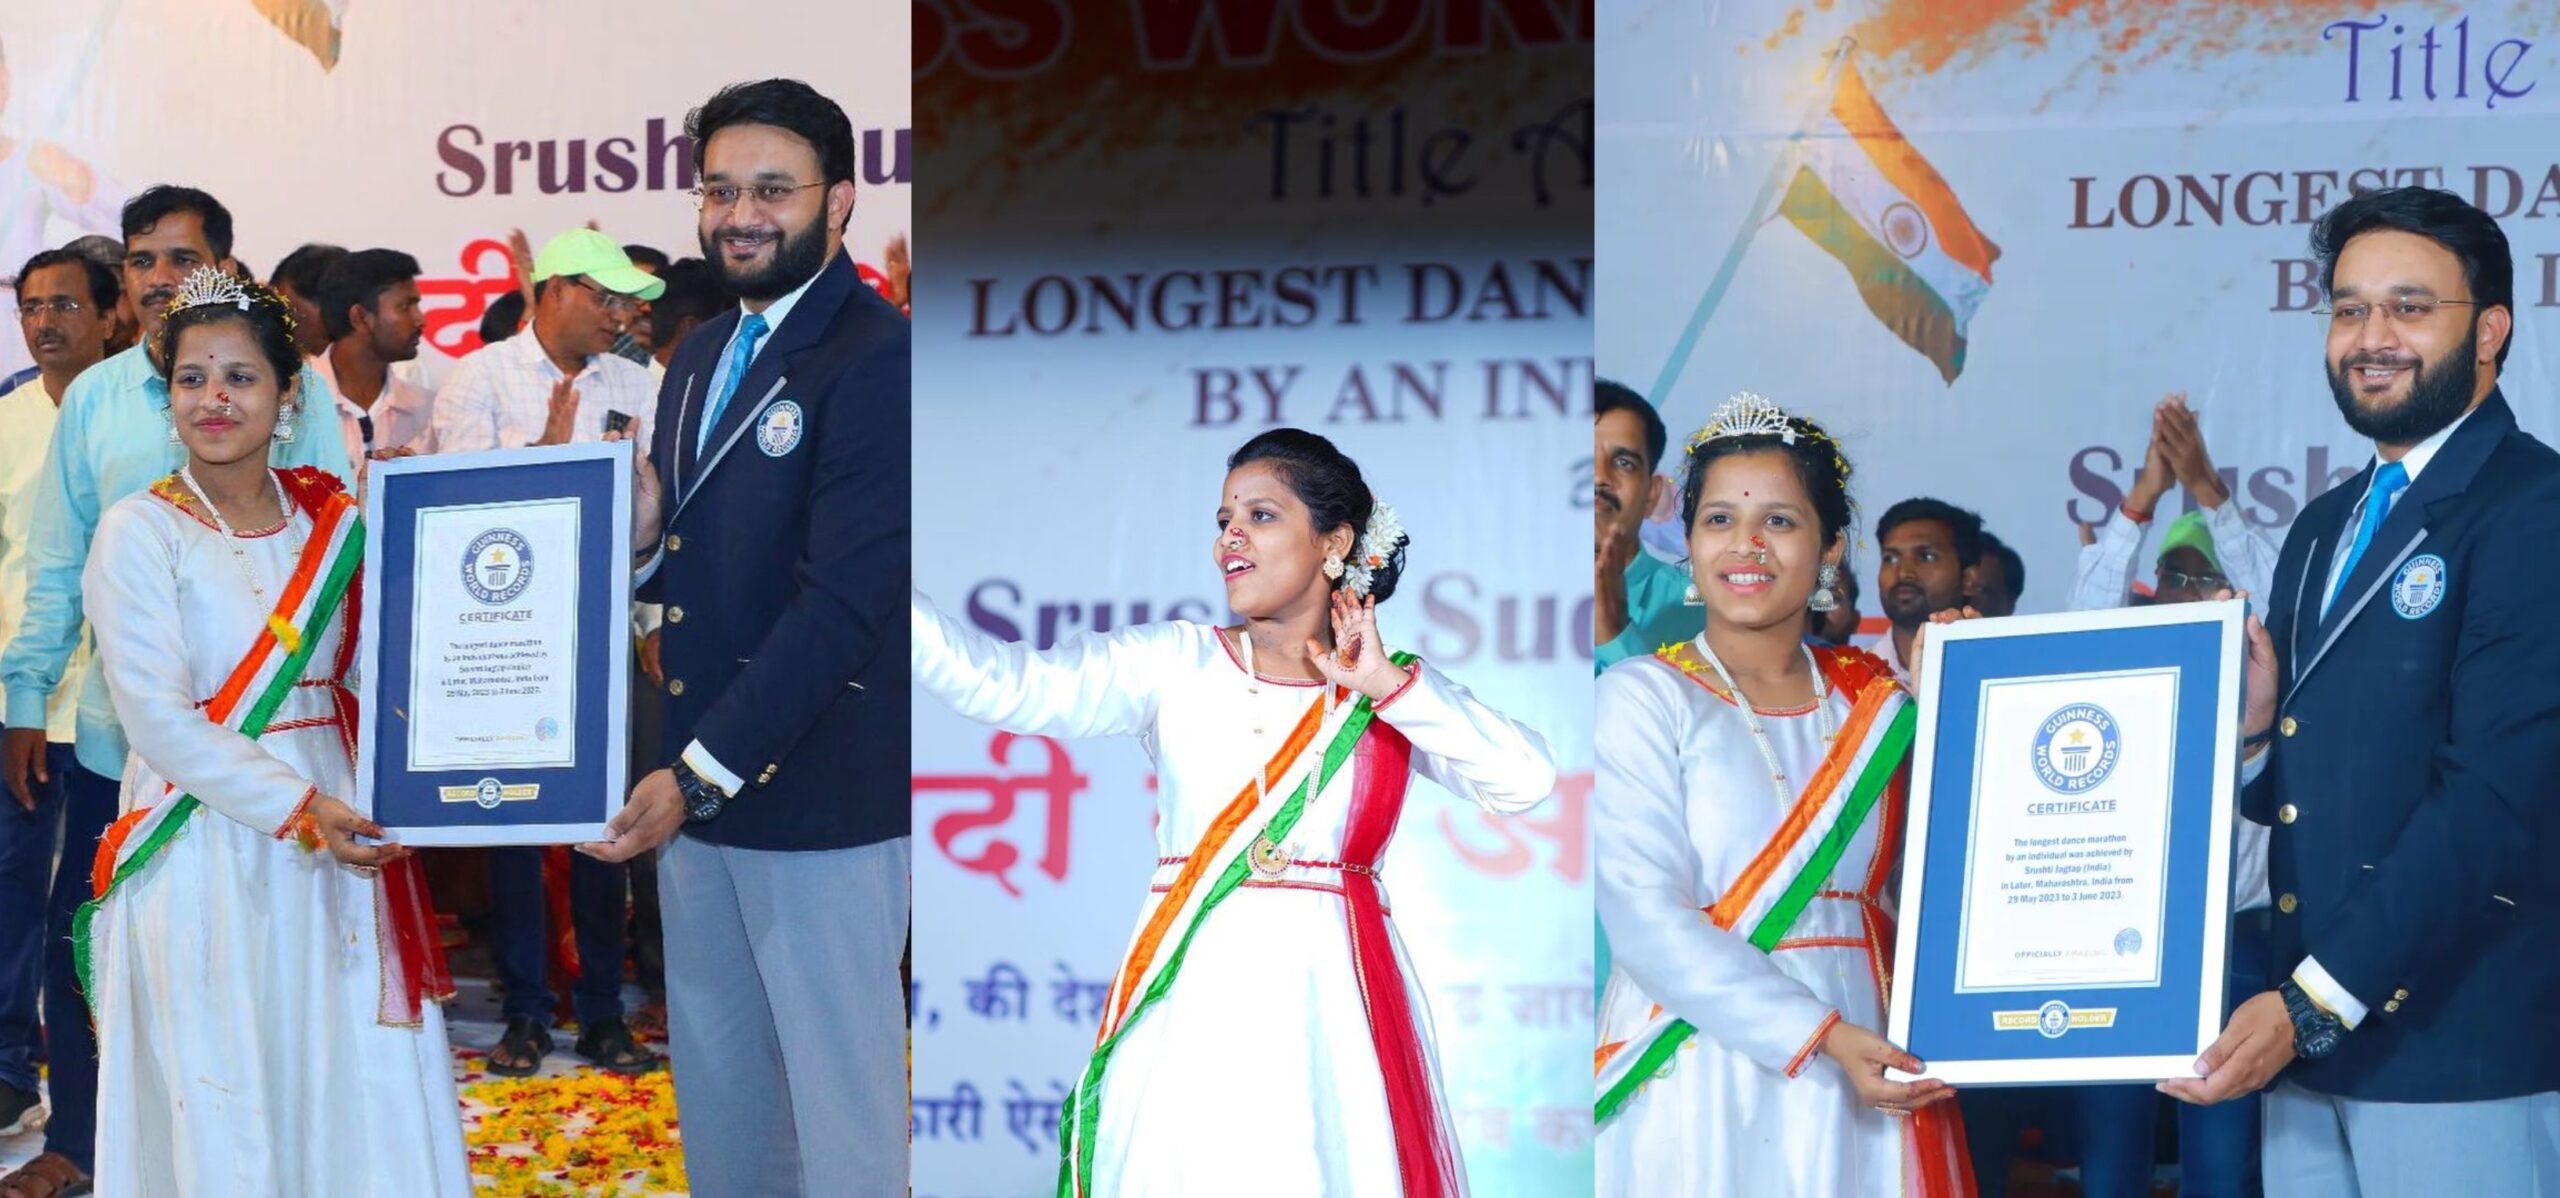 16yr old indian girl awarded Guinness world record certificate for dancing for 5 days without stopping (Photos)